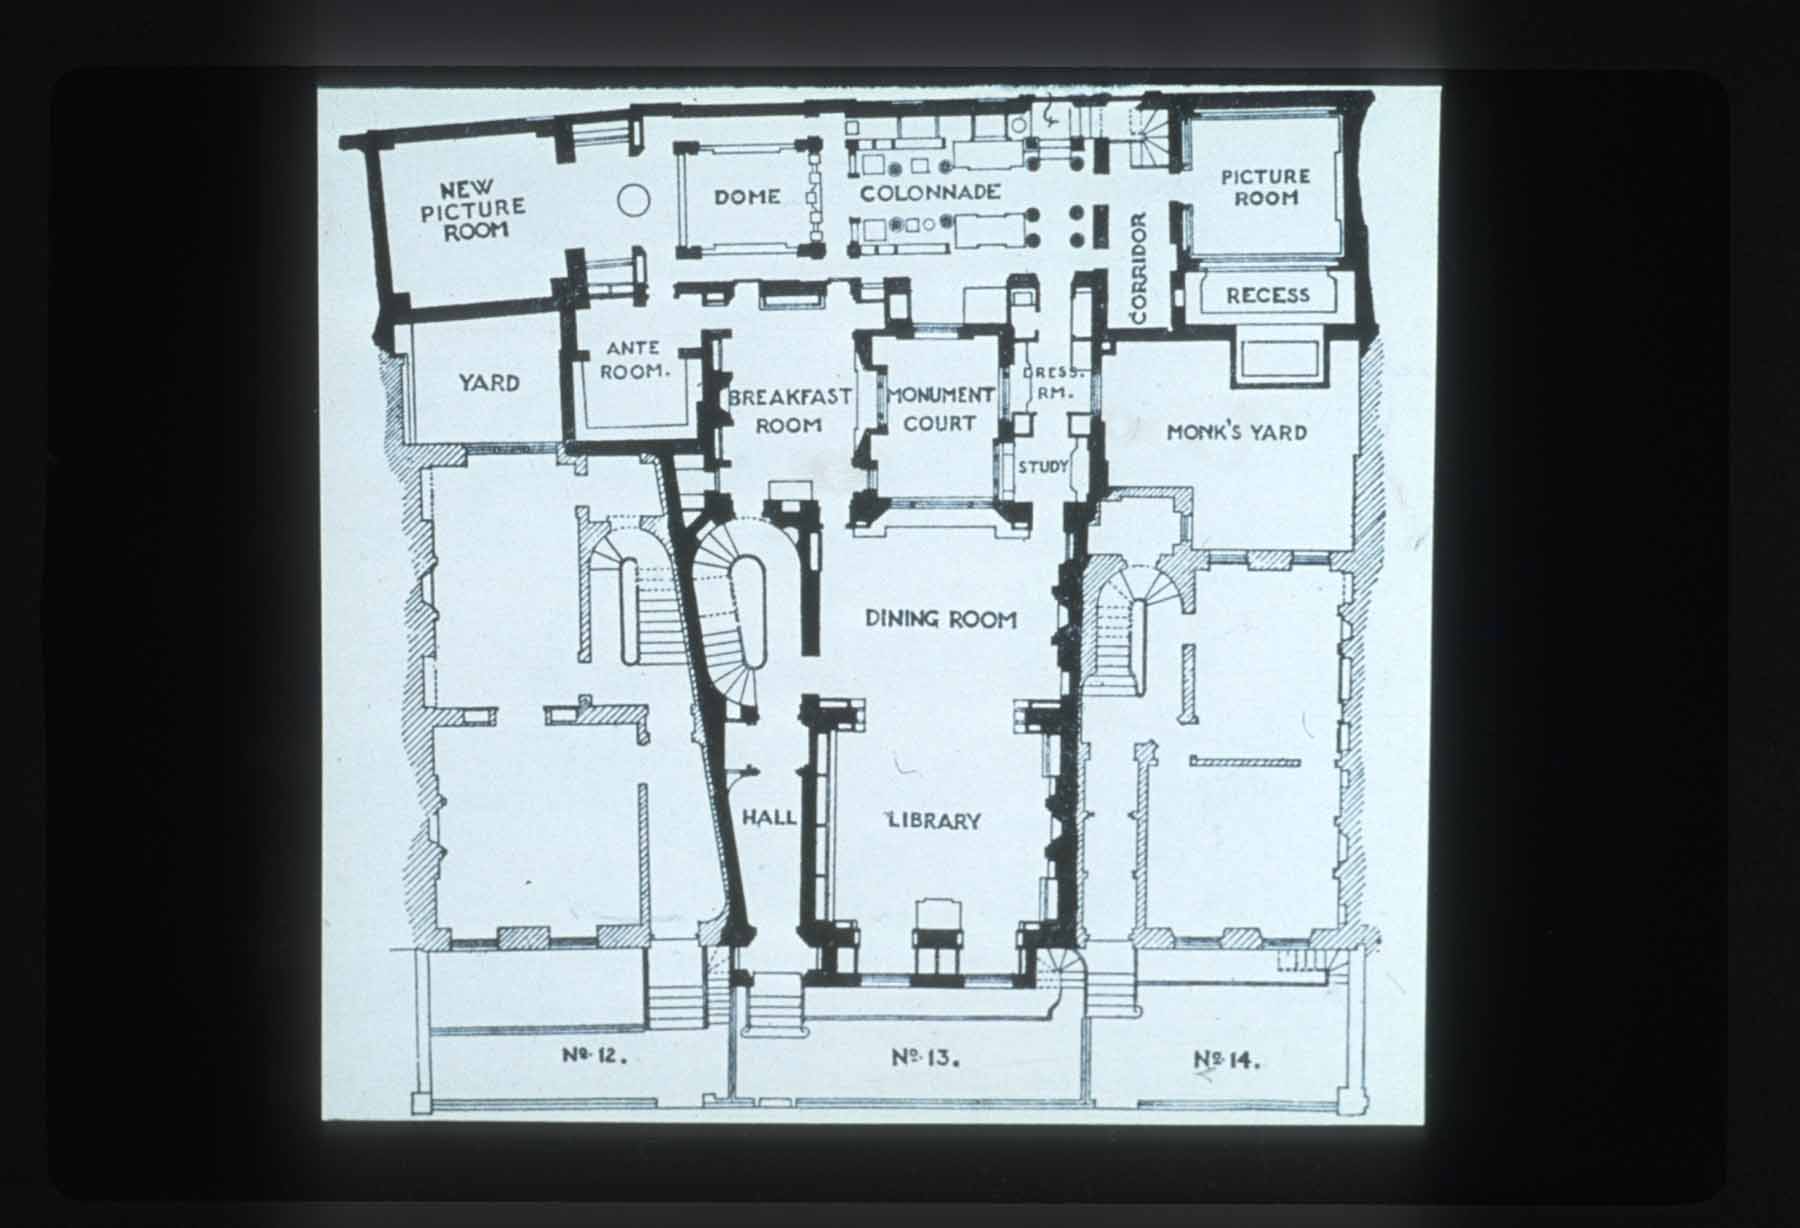 Ground Floor Plan Of Numbers 12, 13 & 14 Lincoln's Inn Fields (The Museum Is Outlined In Black)